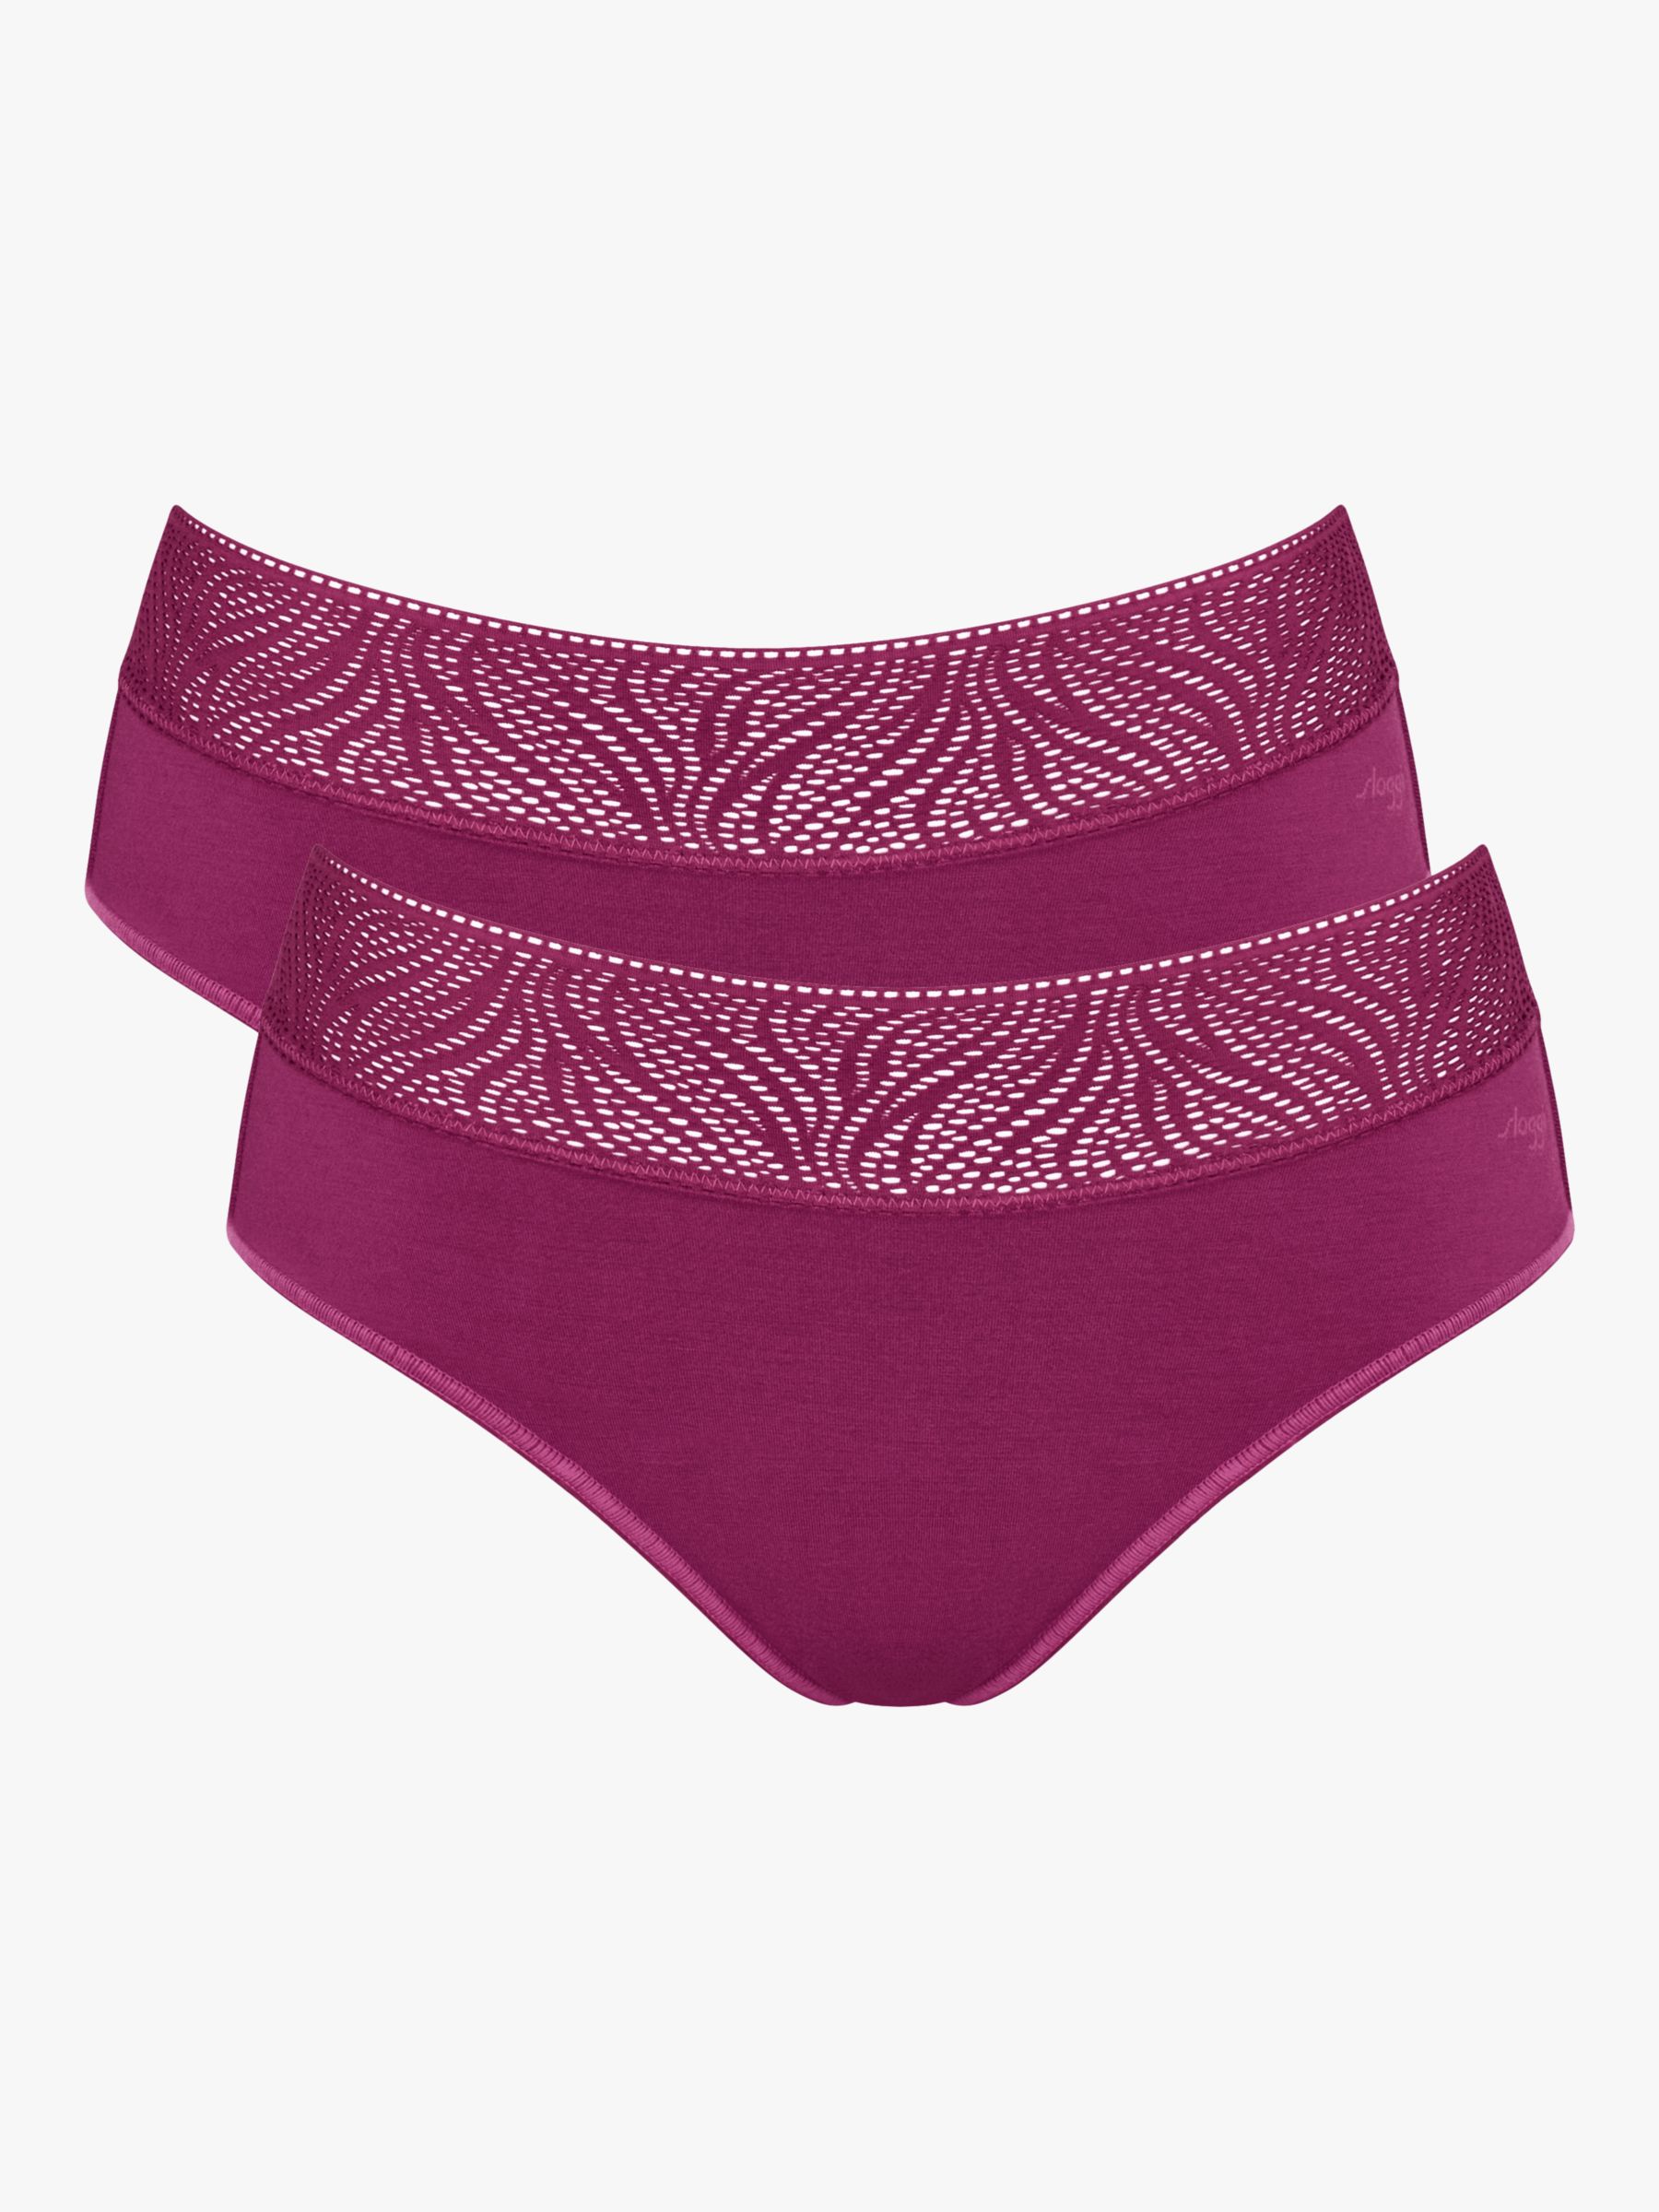 Grey Pink Cashmere hipster brief Women's Medium | Ready-to-ship